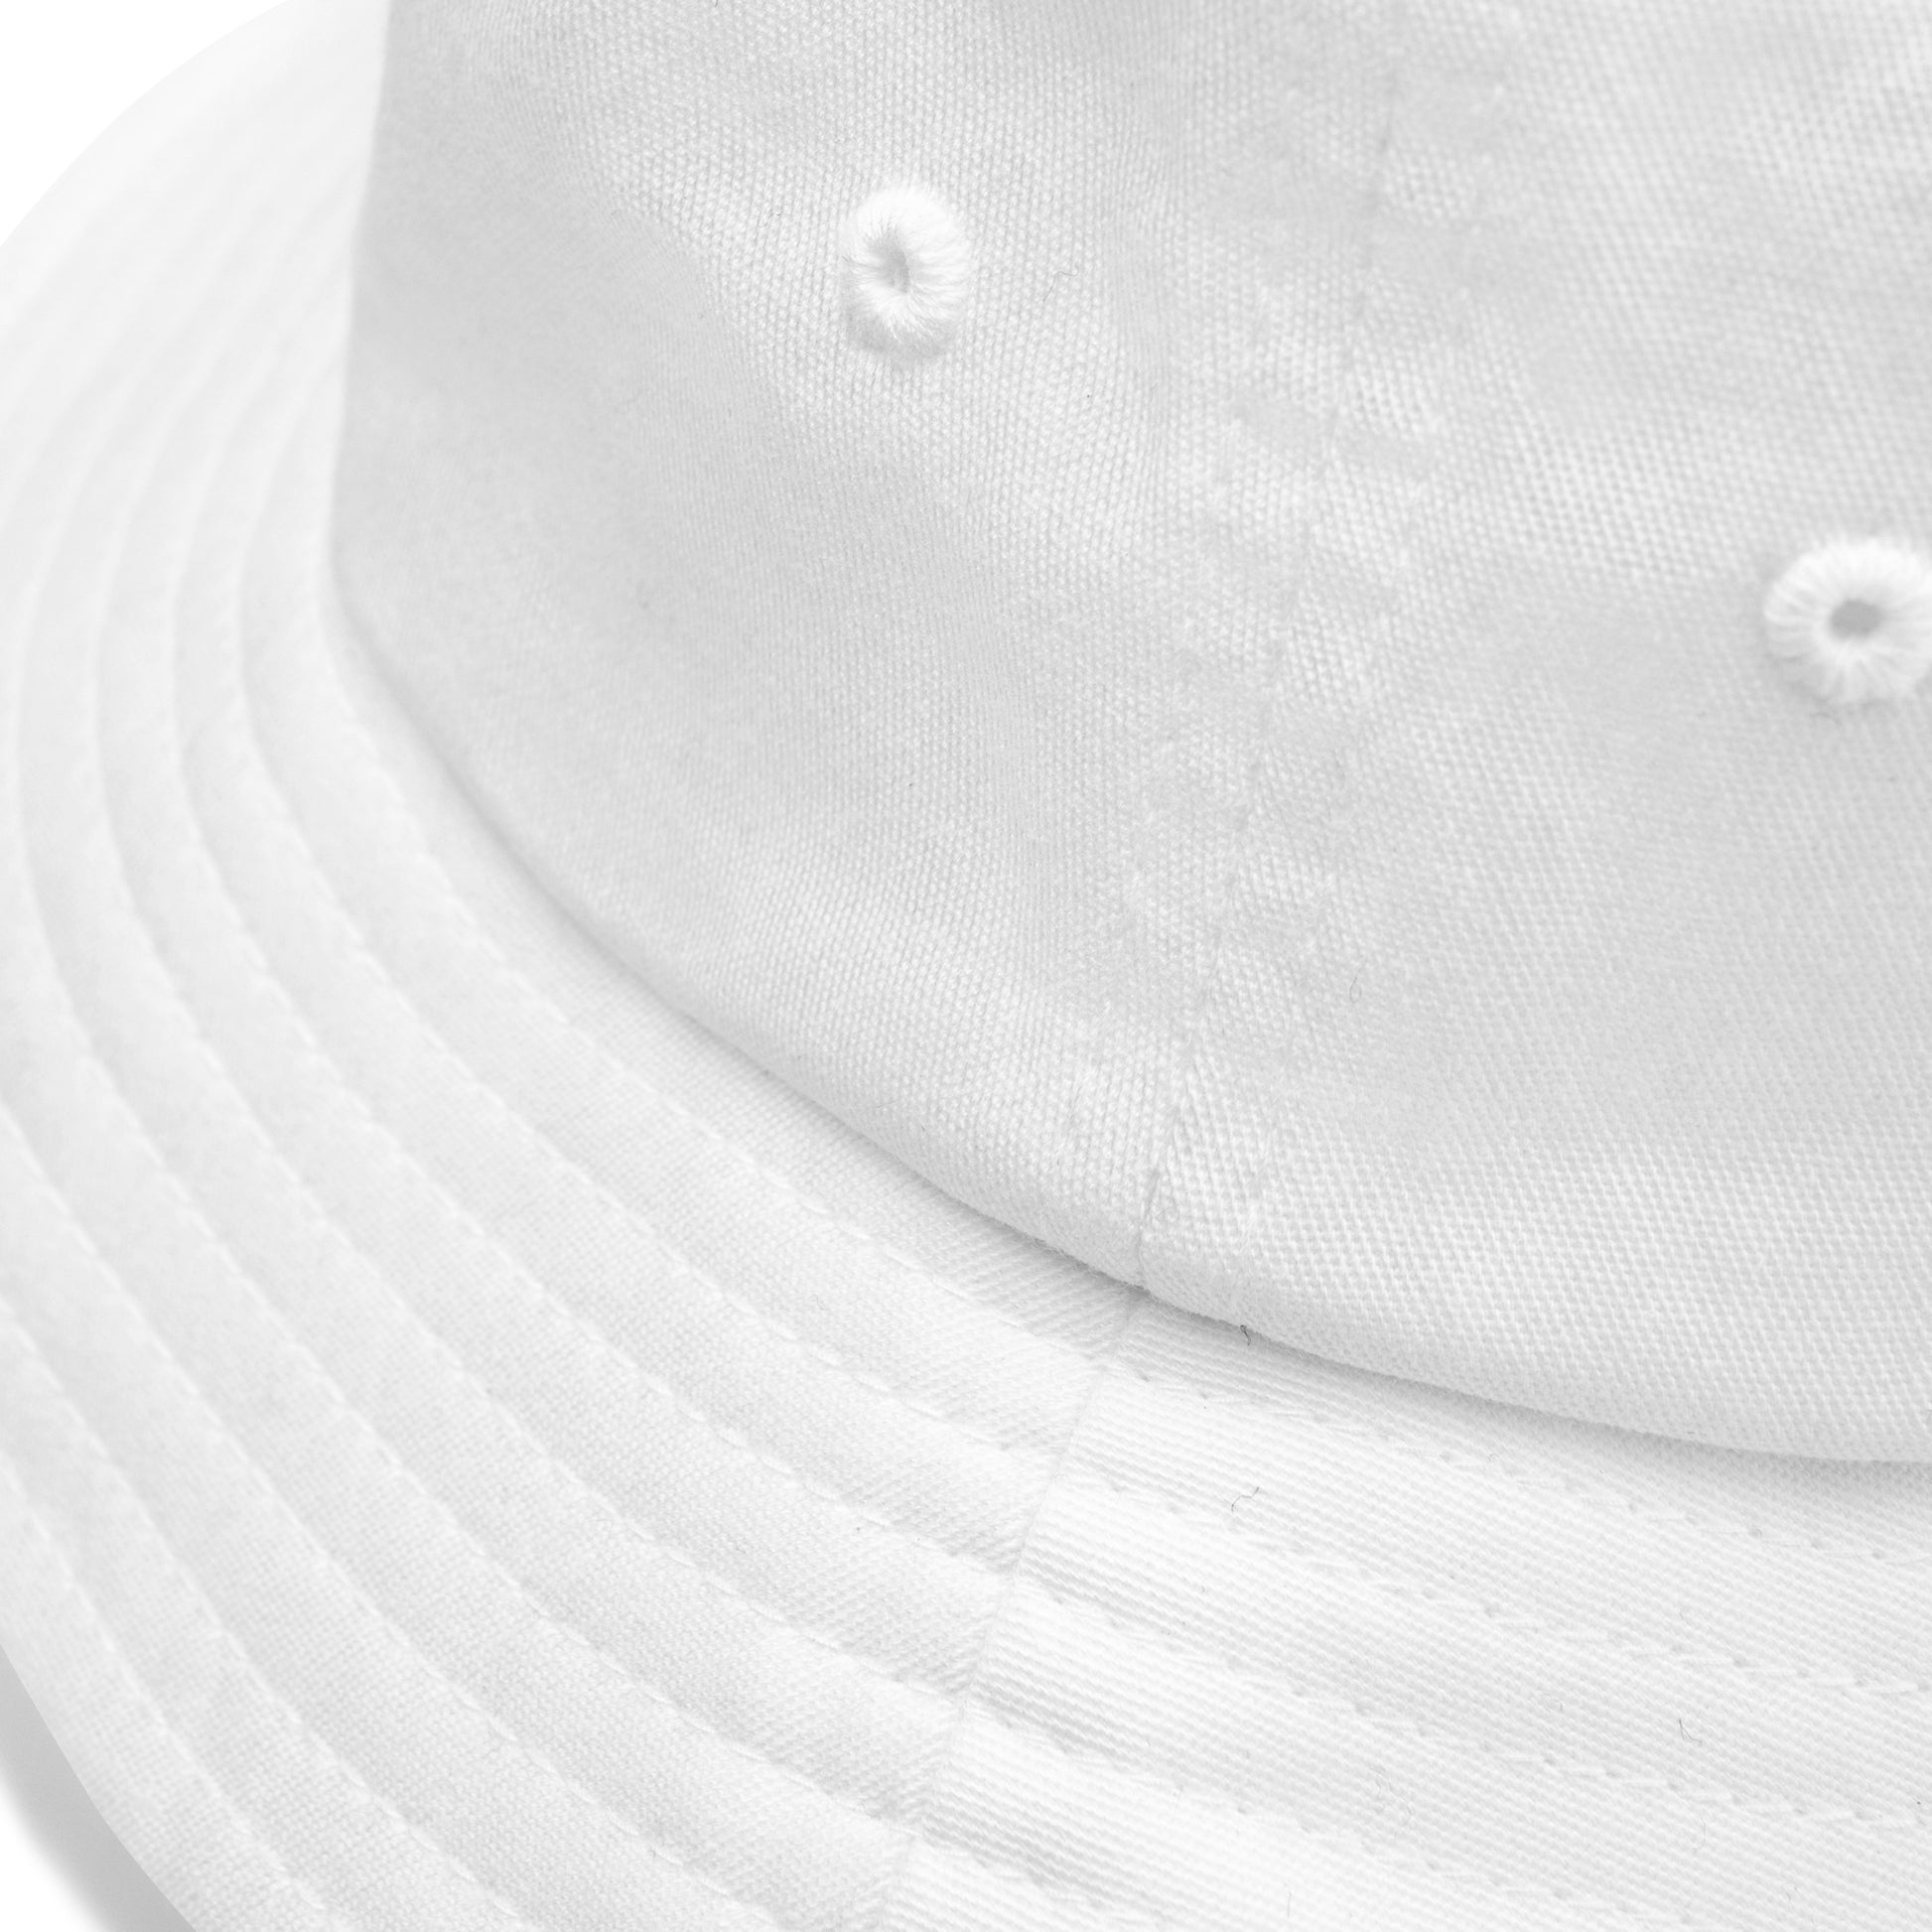 detail of bob bucket hat white b.dfrnt by b.different clothing independent streetwear inspired by street art graffiti